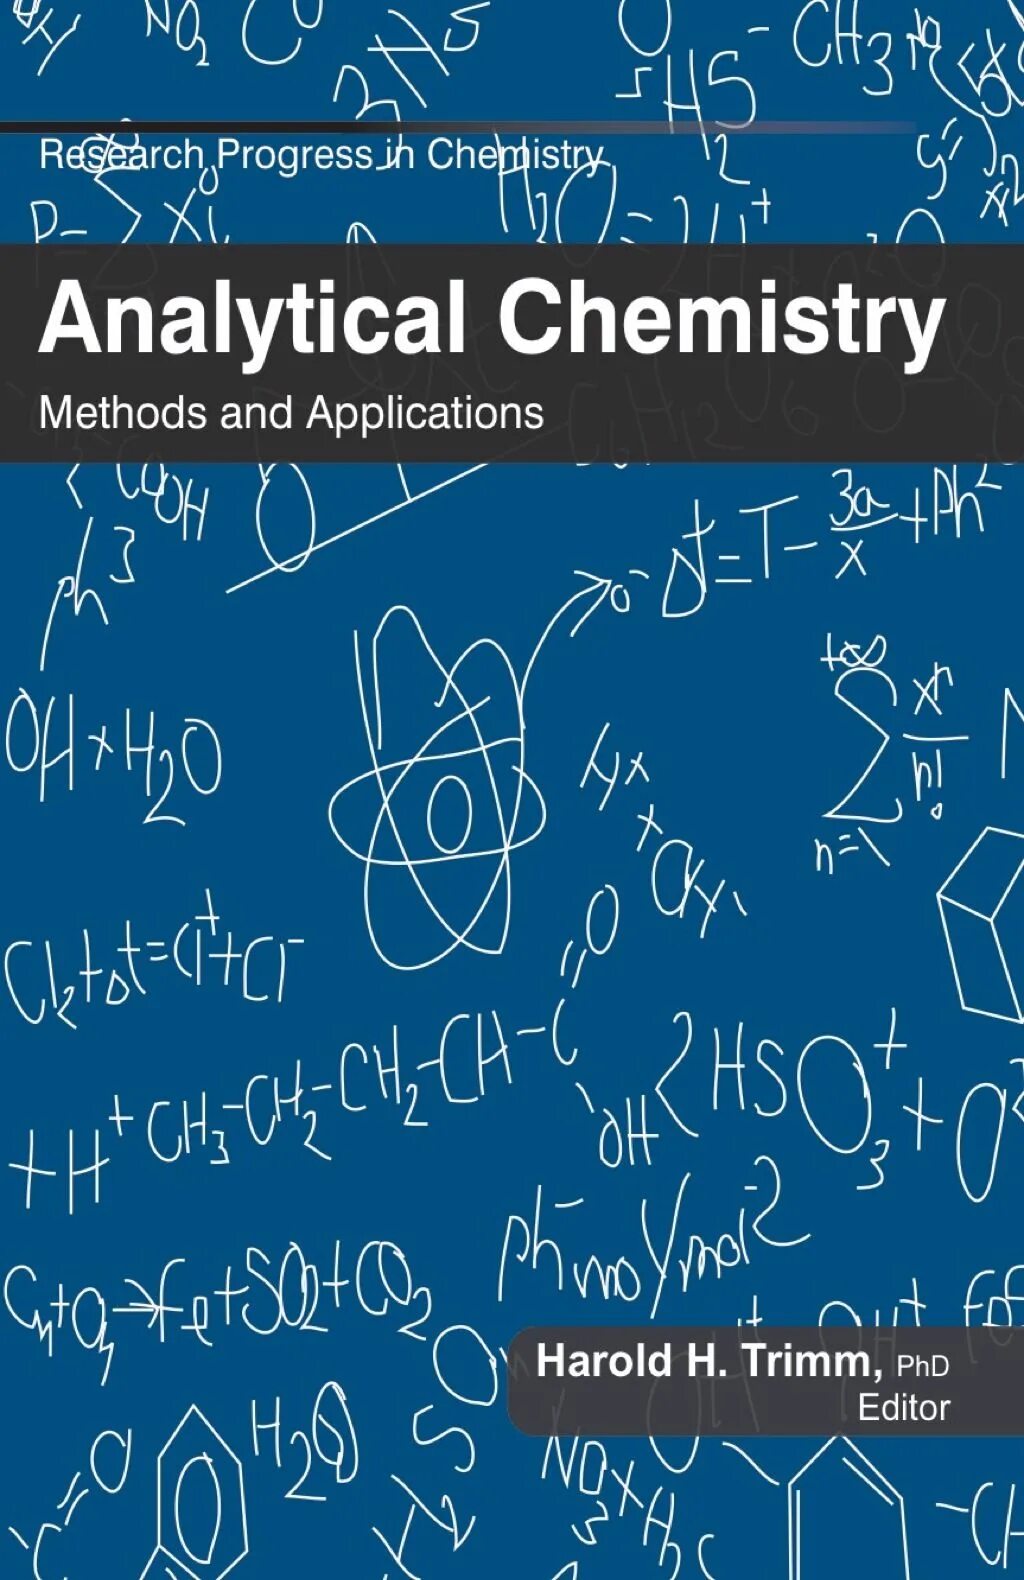 Methods including. Chemistry Analysis. Analytical Chemistry applications. Harris Chemical Analysis. Analytical Chemistry book.